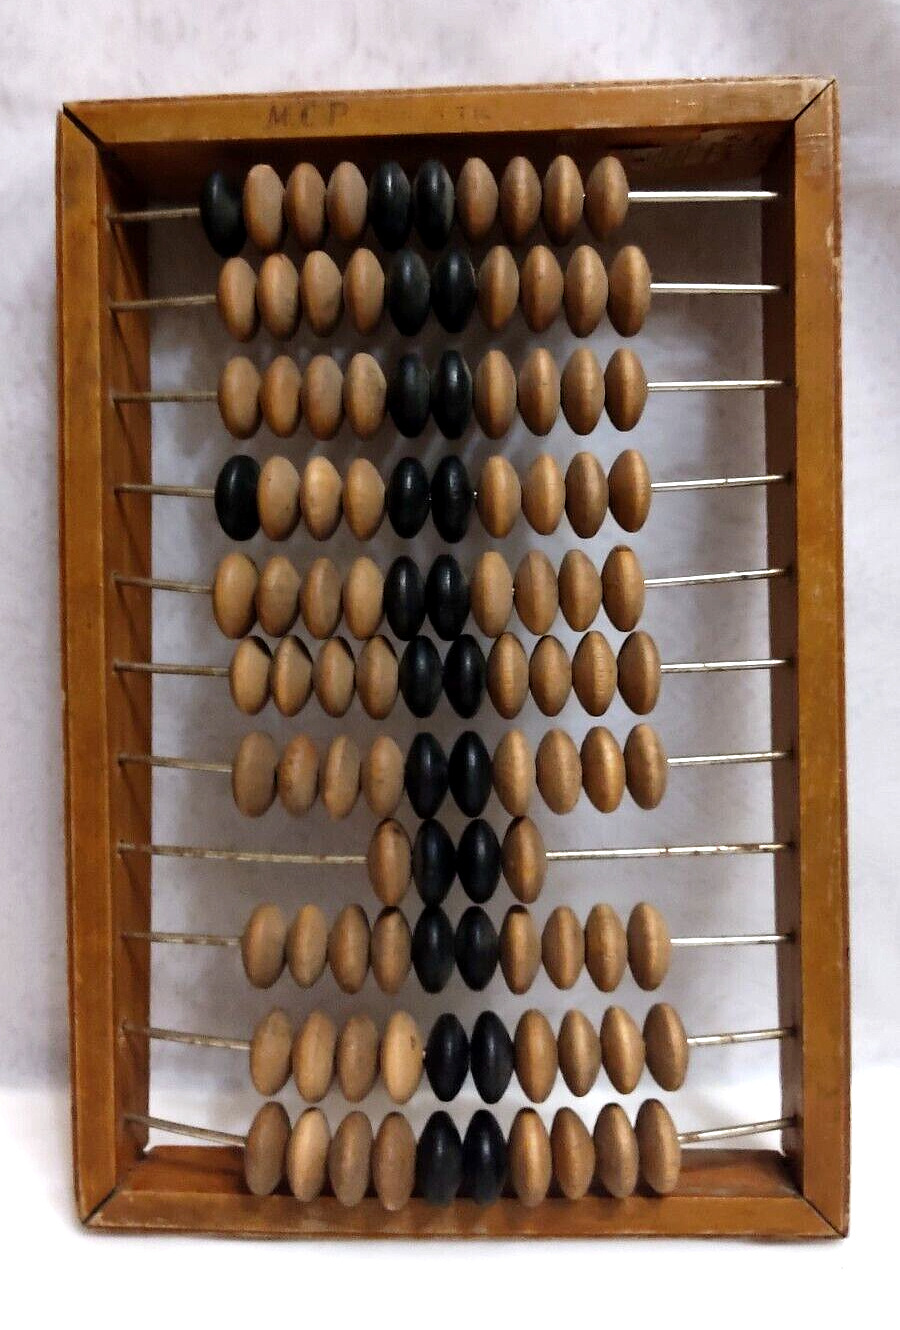 Abacus Vintage Soviet Ussr Wooden Calculator Russian Counting Old Wood Retro Acc